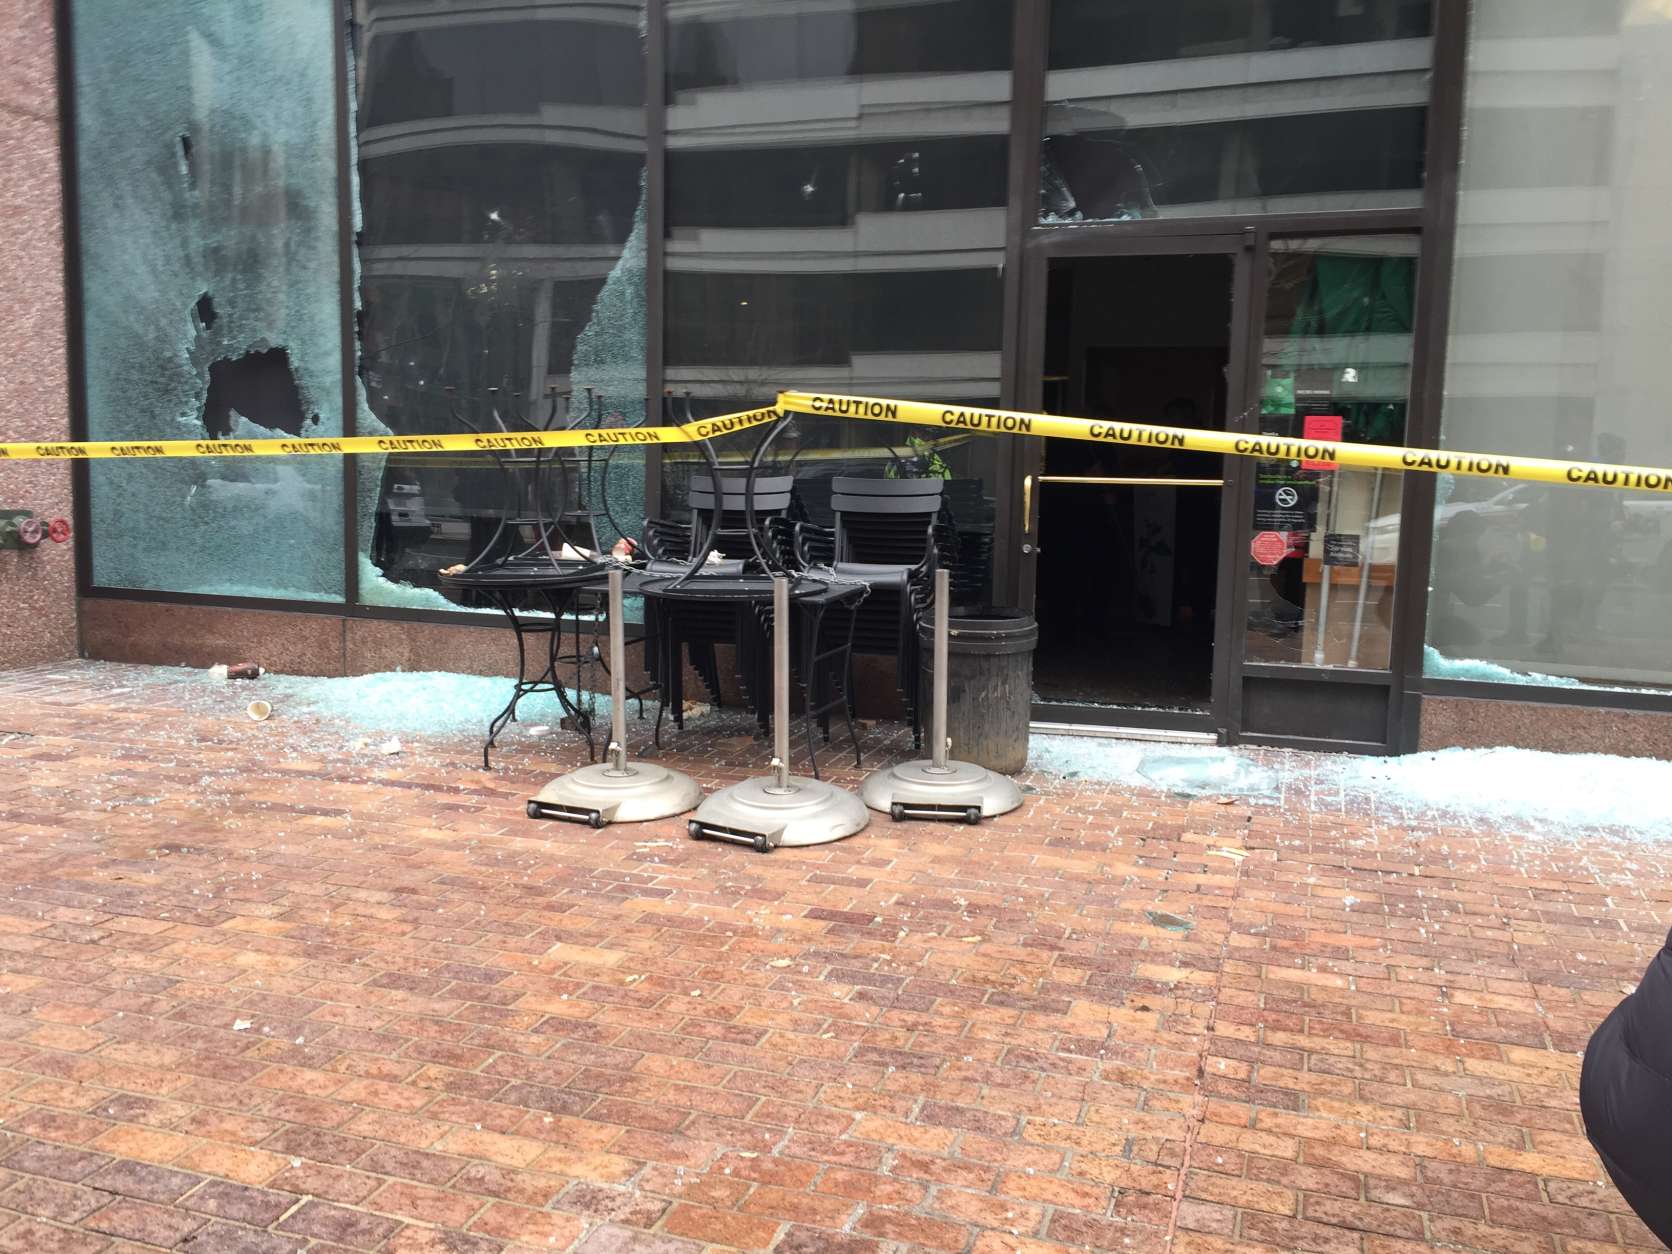 The window of a Starbucks was broken at 13th and I streets in northwest Washington. (WTOP/Dennis Foley)